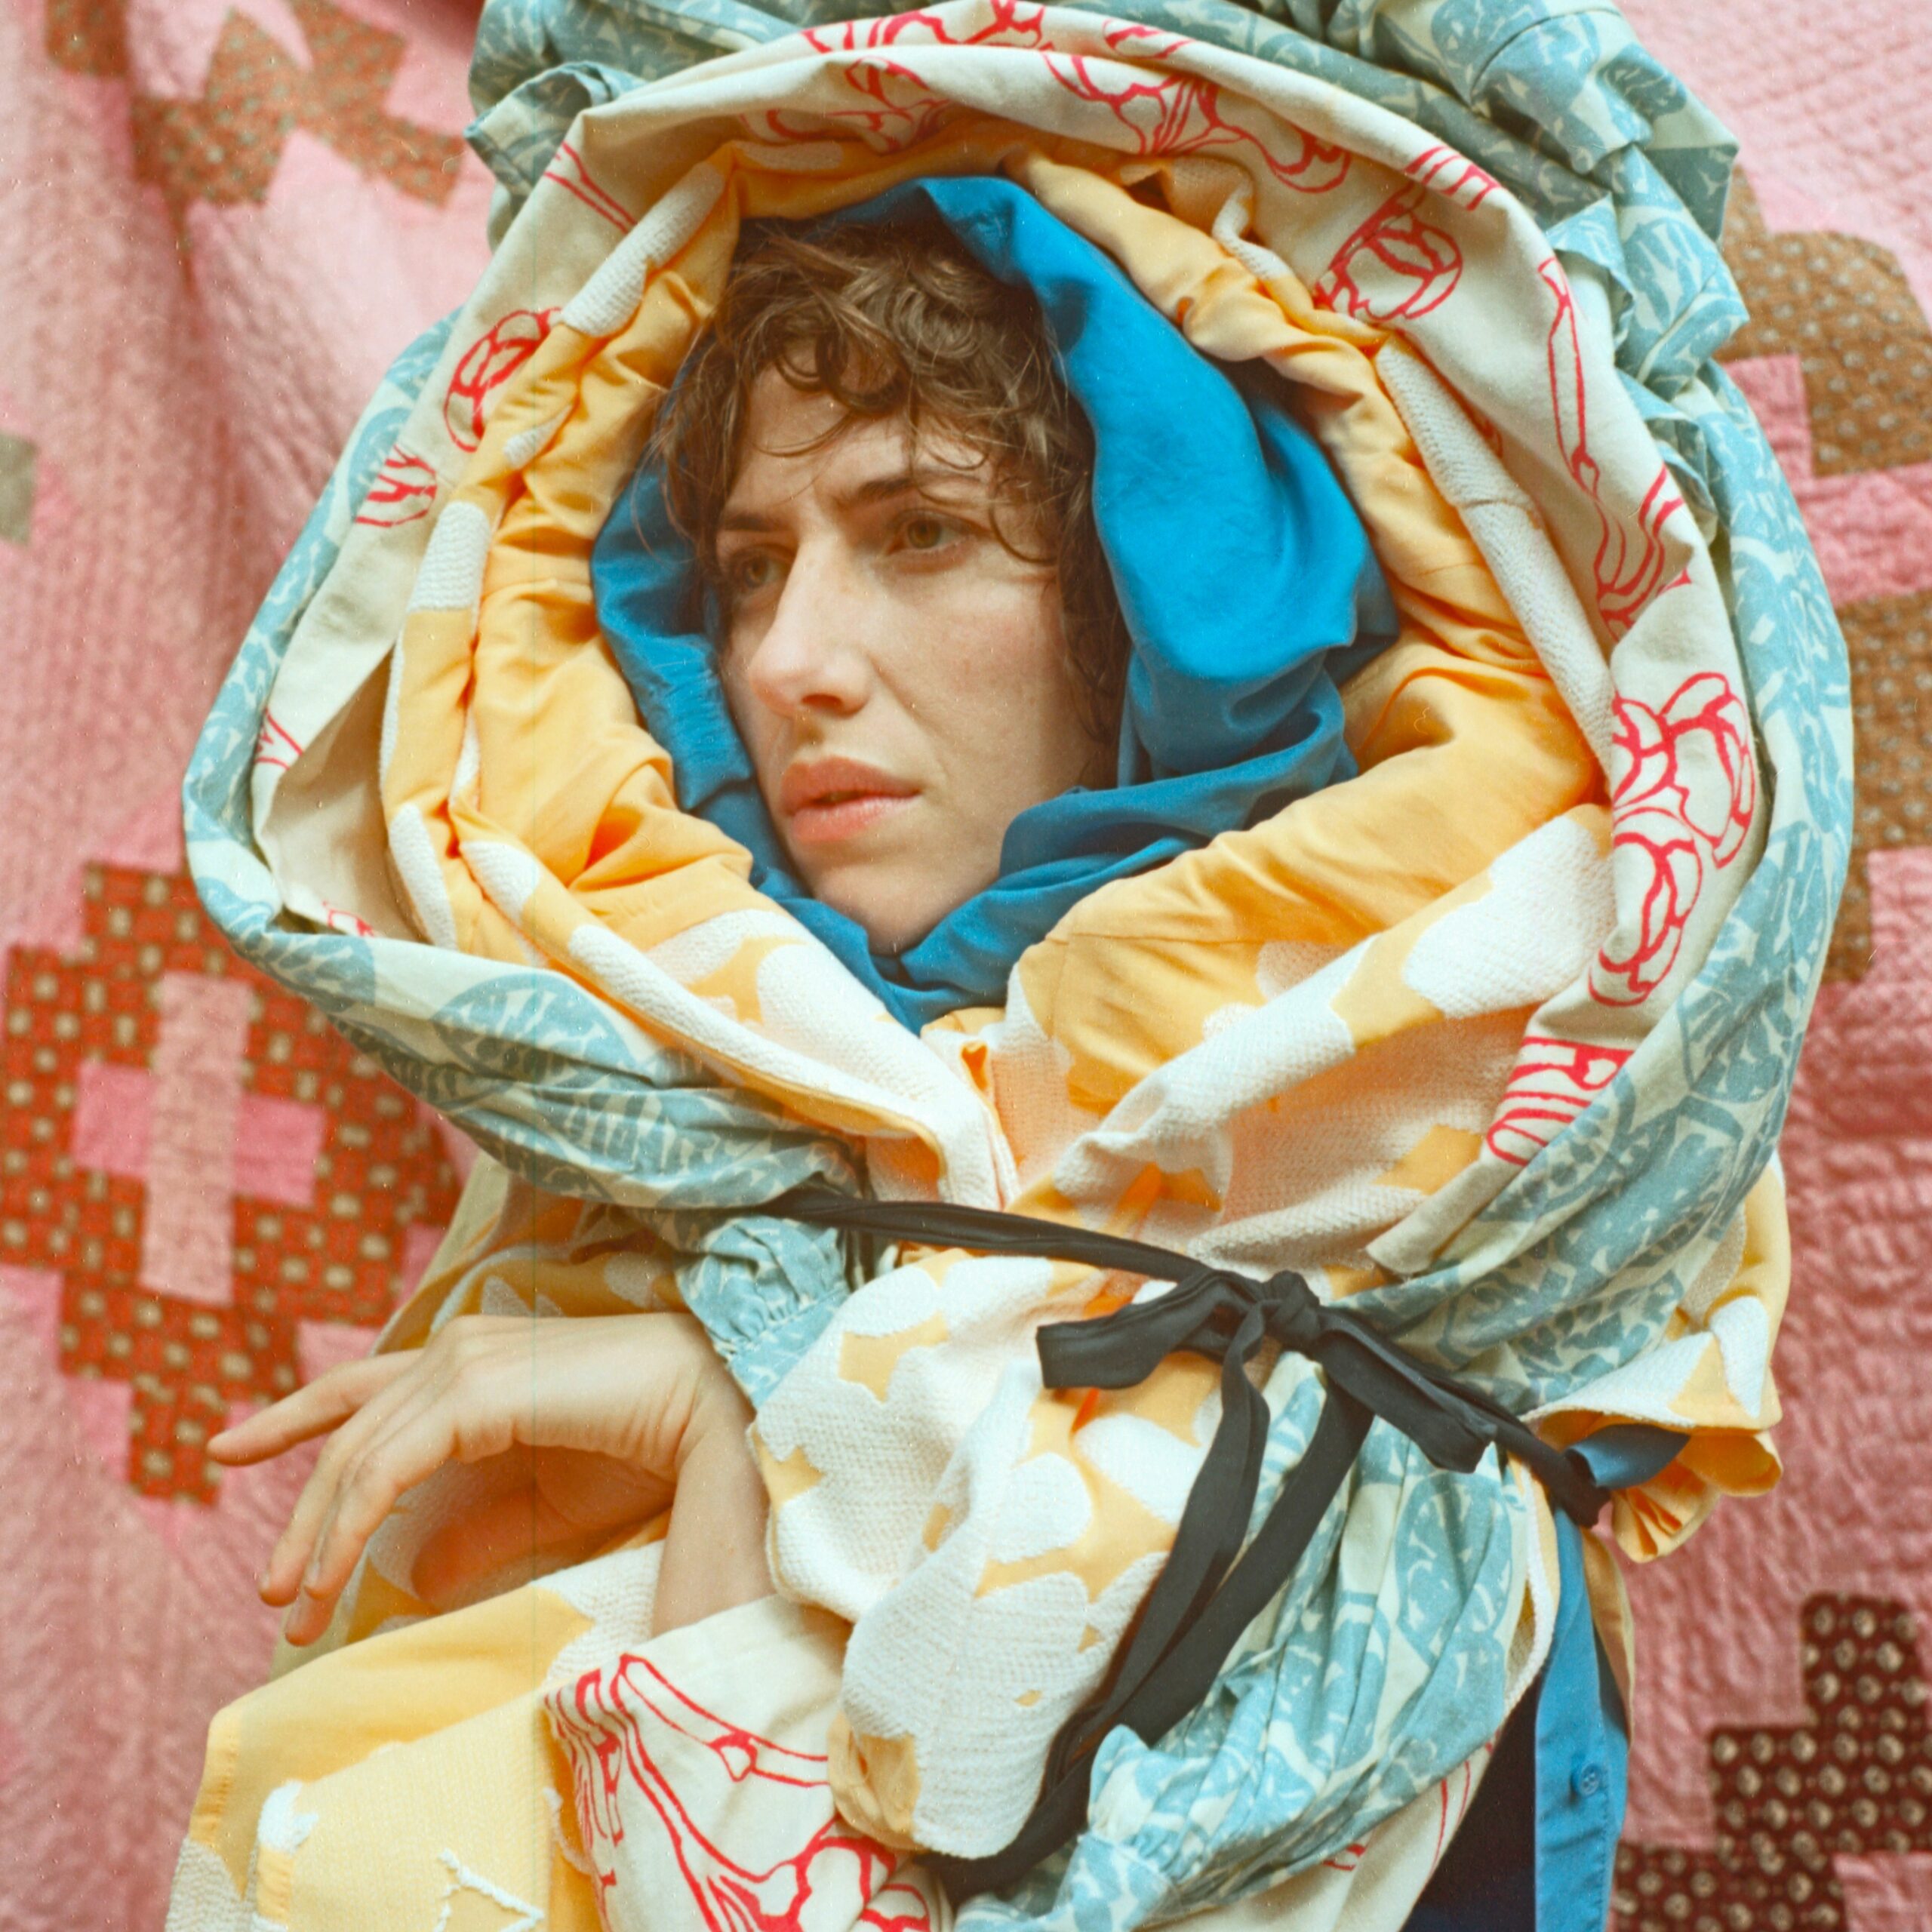 Aldous Harding by Emma Wallbanks 1 (Fever.)